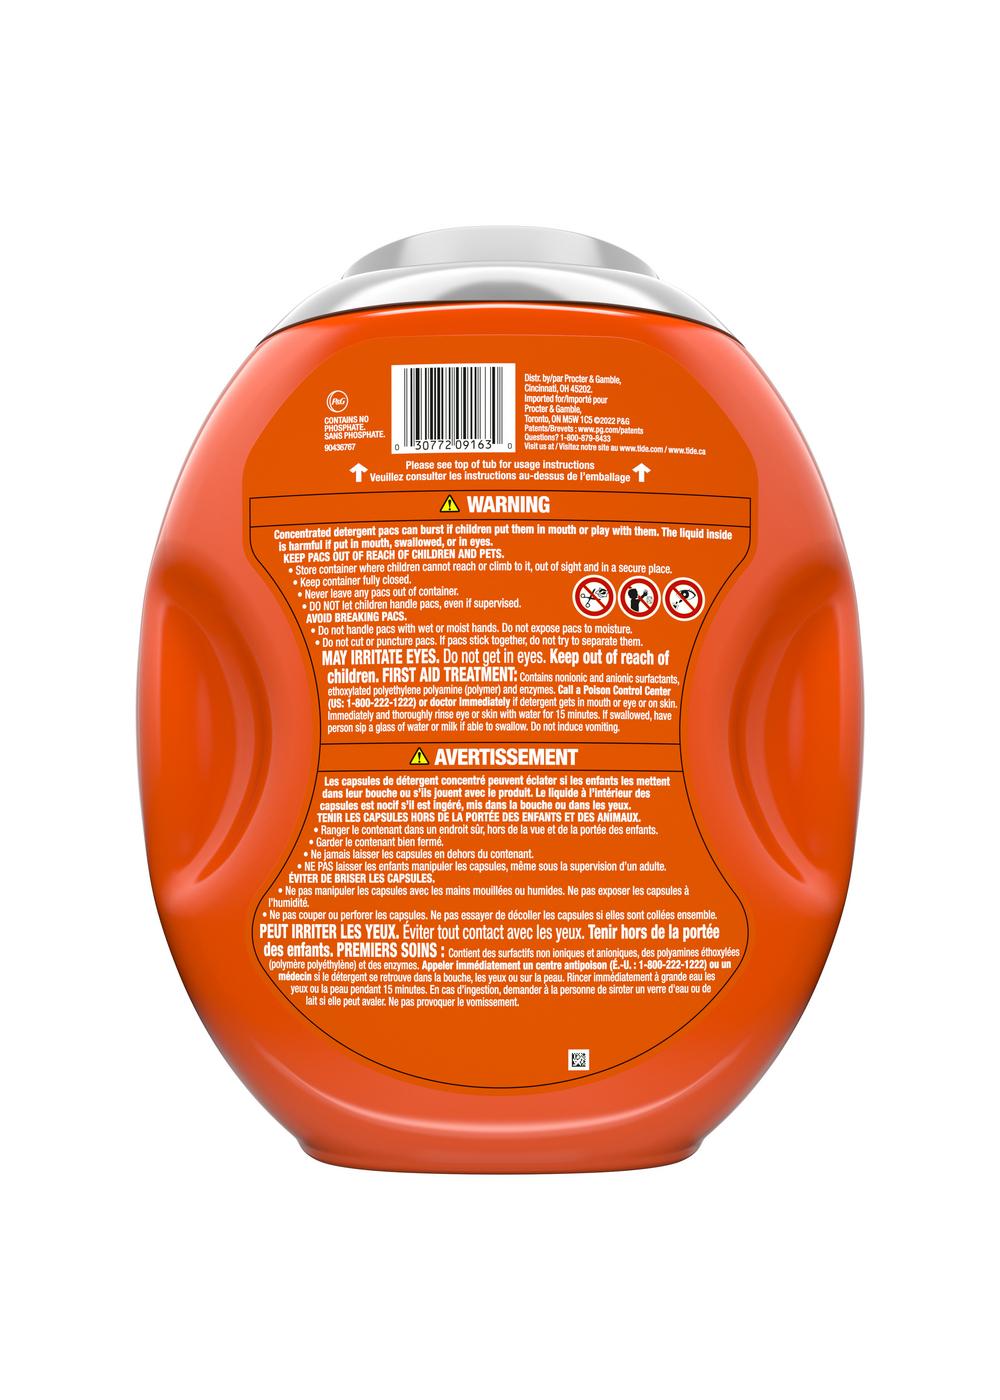 Tide Power PODS Hygienic Clean Heavy Duty Original HE Laundry Detergent; image 5 of 10